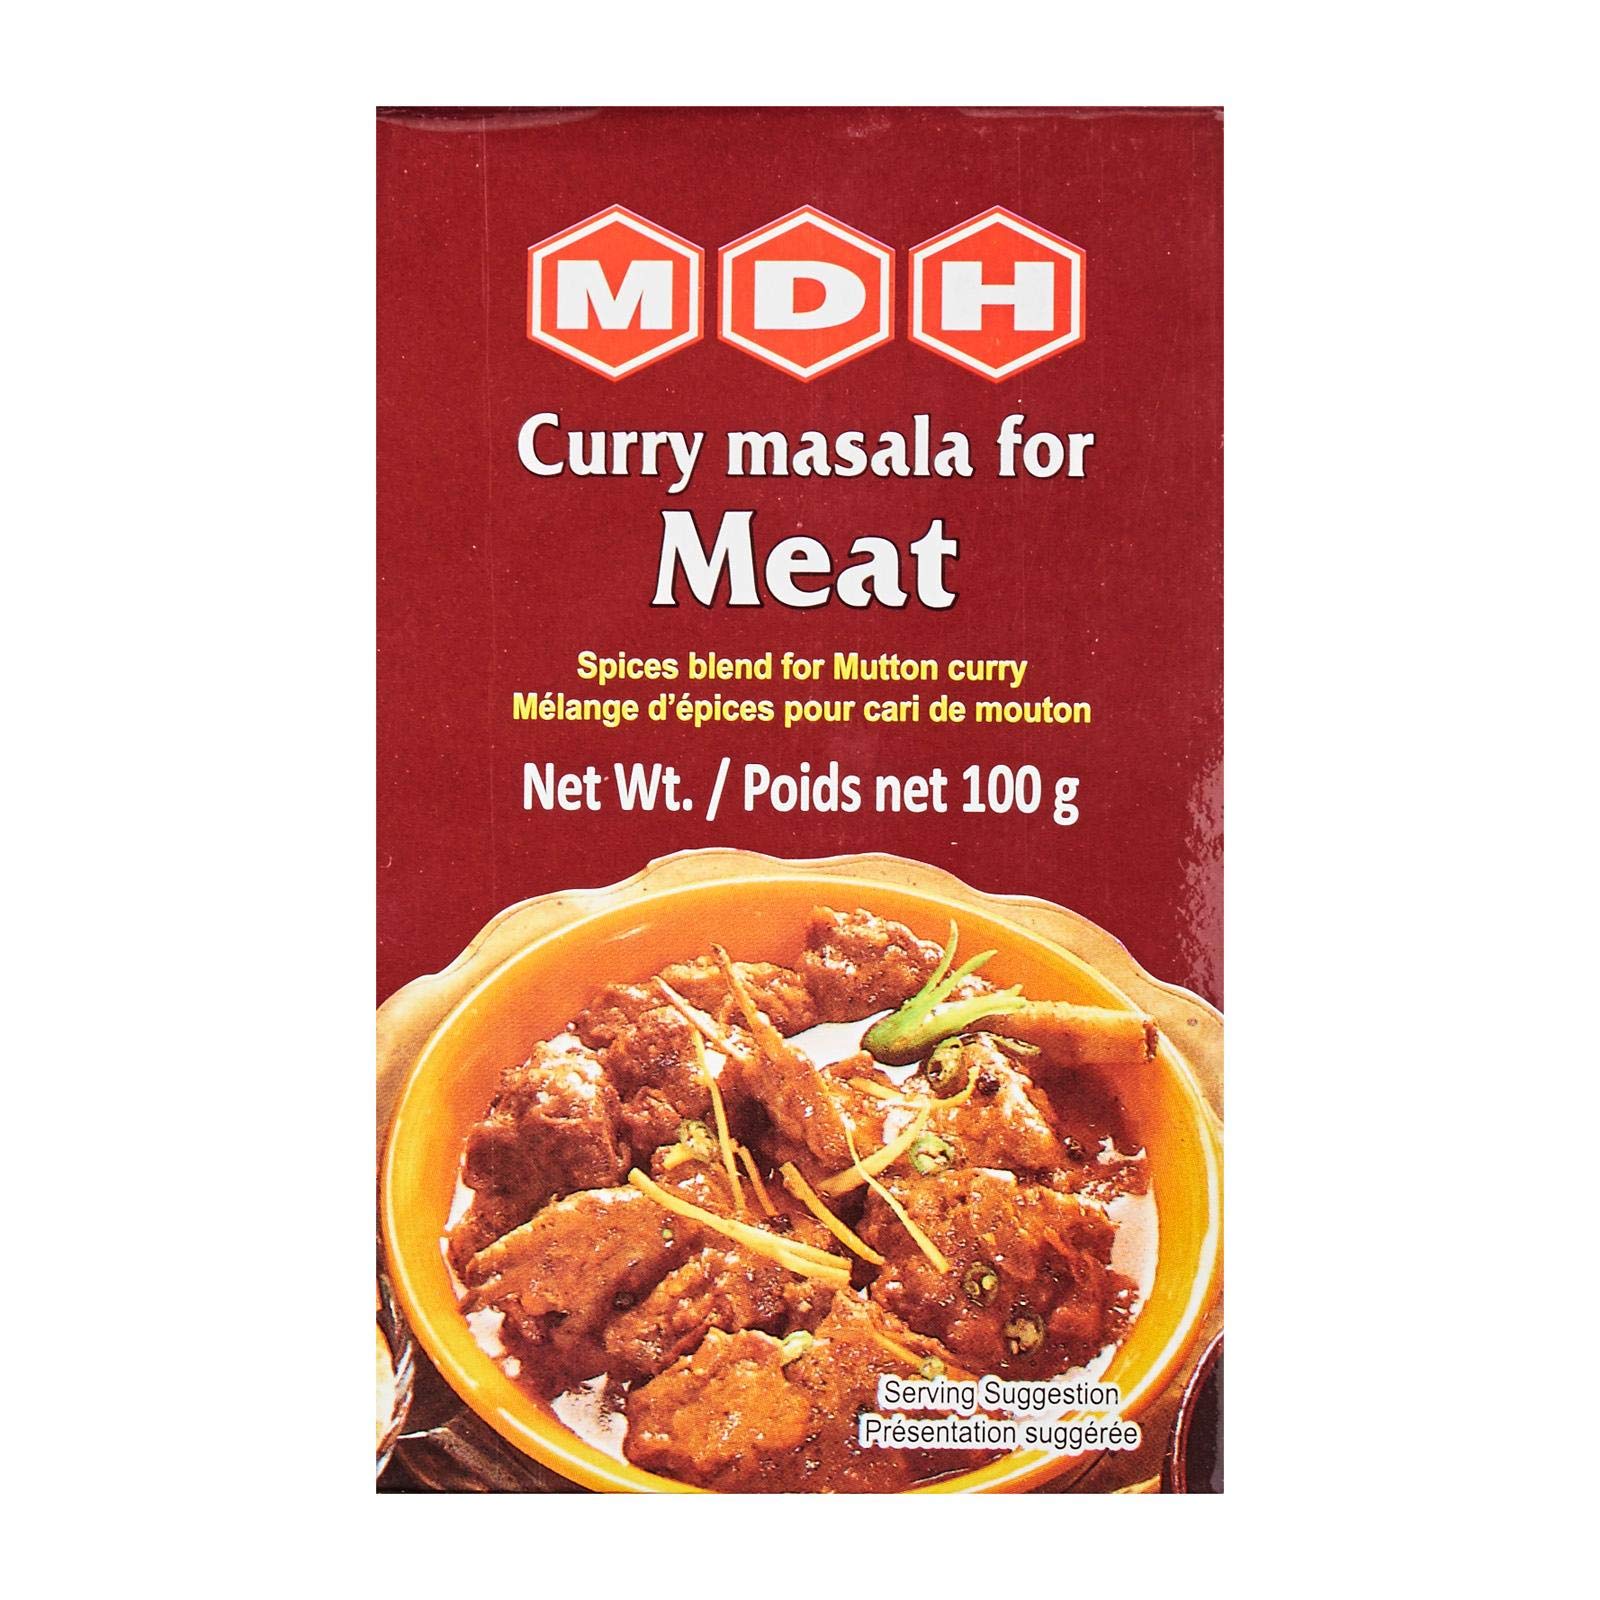 M.D.H. Meat Curry Masala - 100g